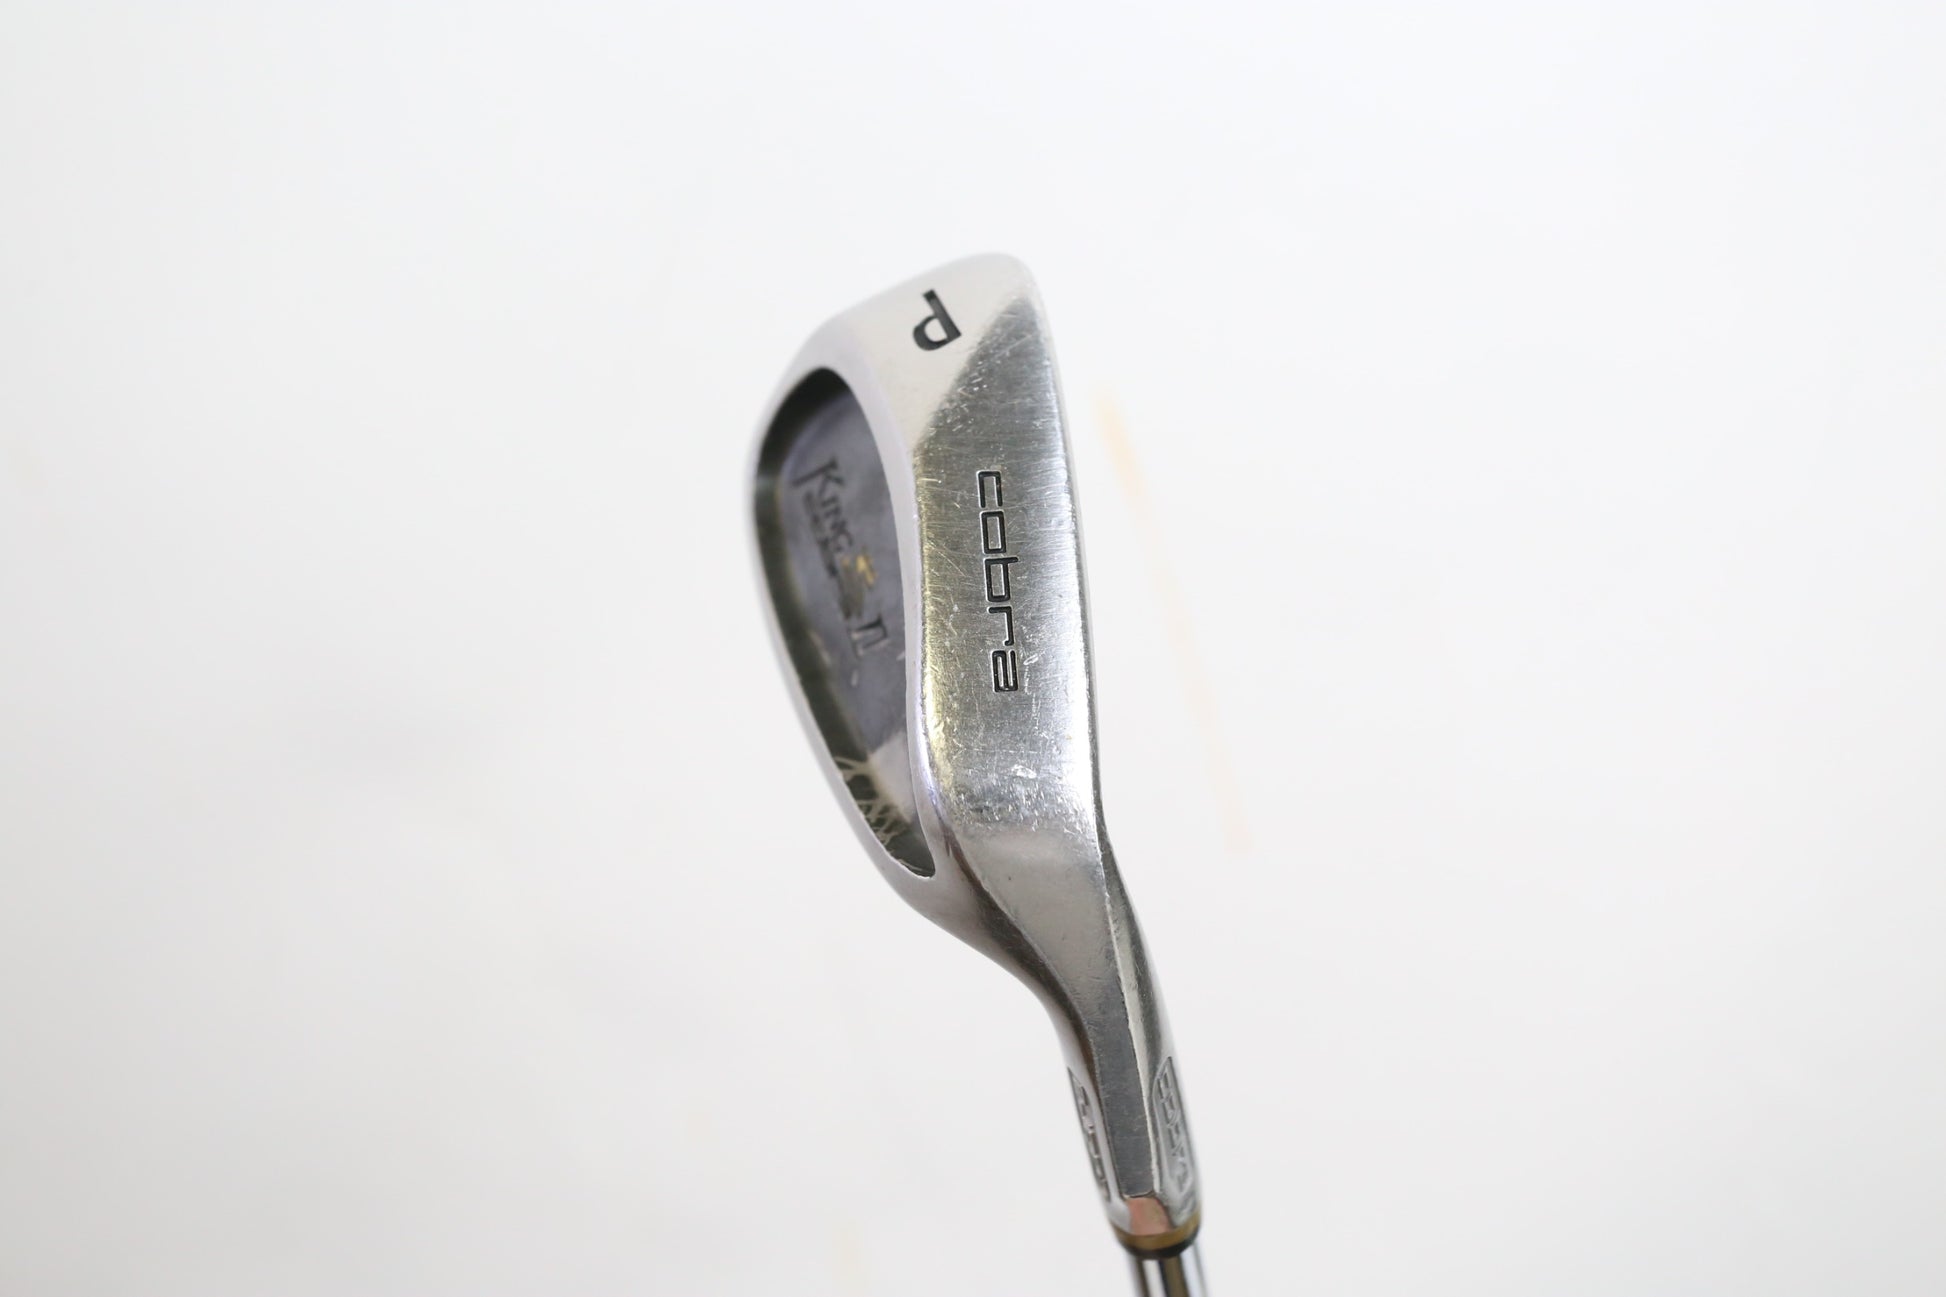 Used Cobra KING COBRA 2 OVERSIZE Pitching Wedge - Right-Handed - 45 Degrees - Stiff Flex-Next Round